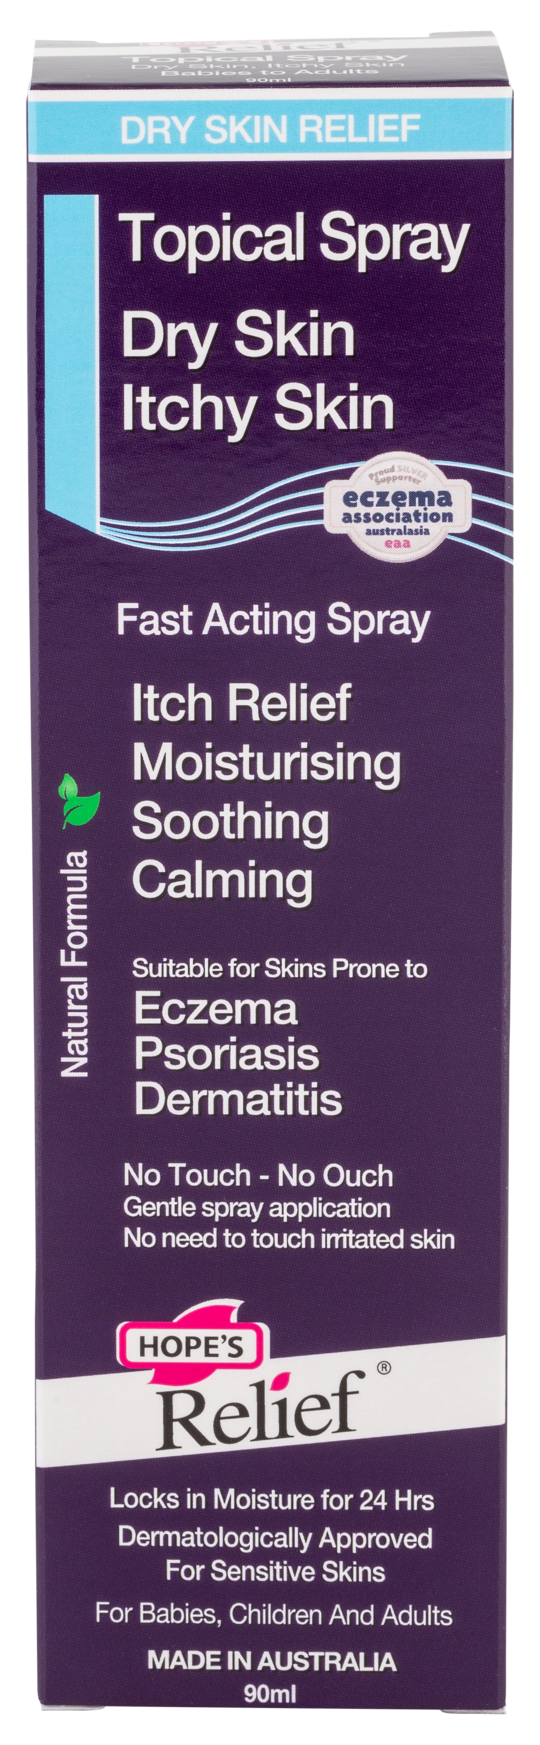 Hopes Relief Topical Spray - Natural Skin Hydration for Dry Skin